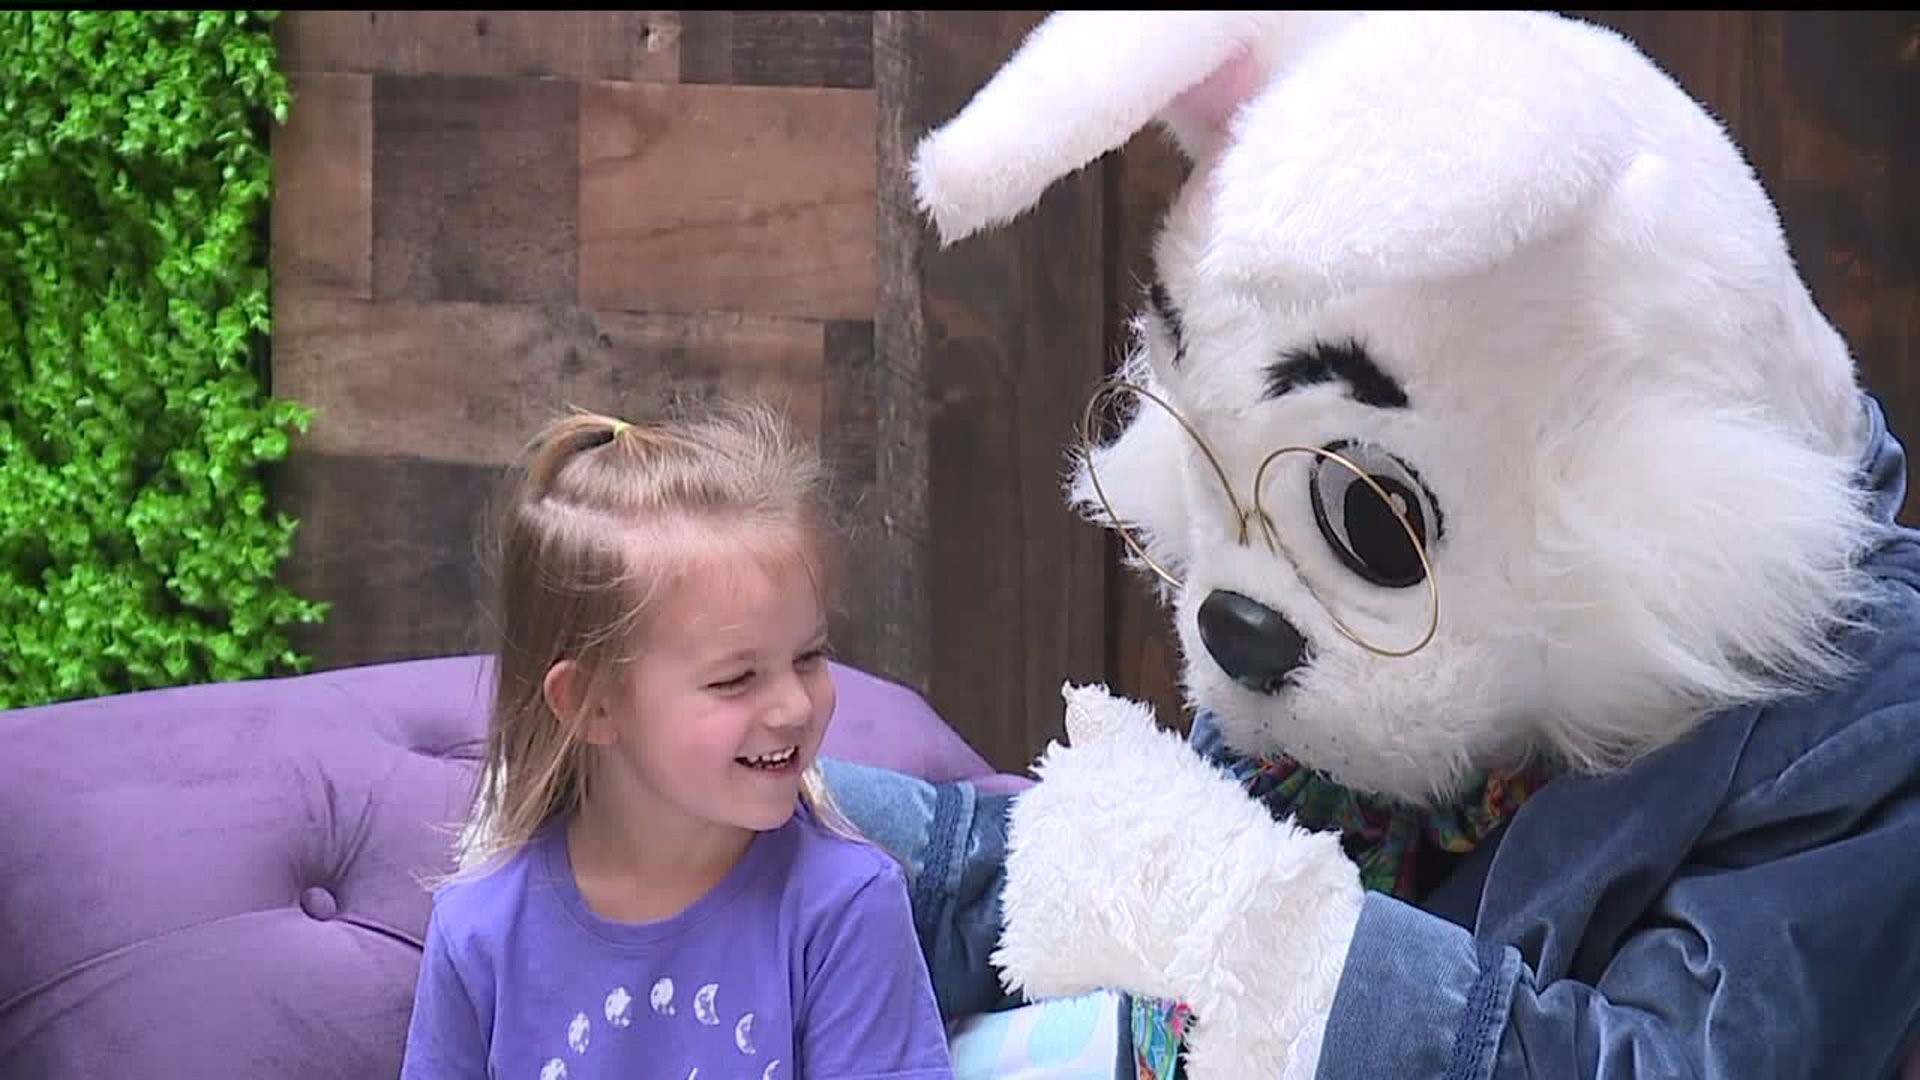 Kids take pictures with the Easter bunny at local mall